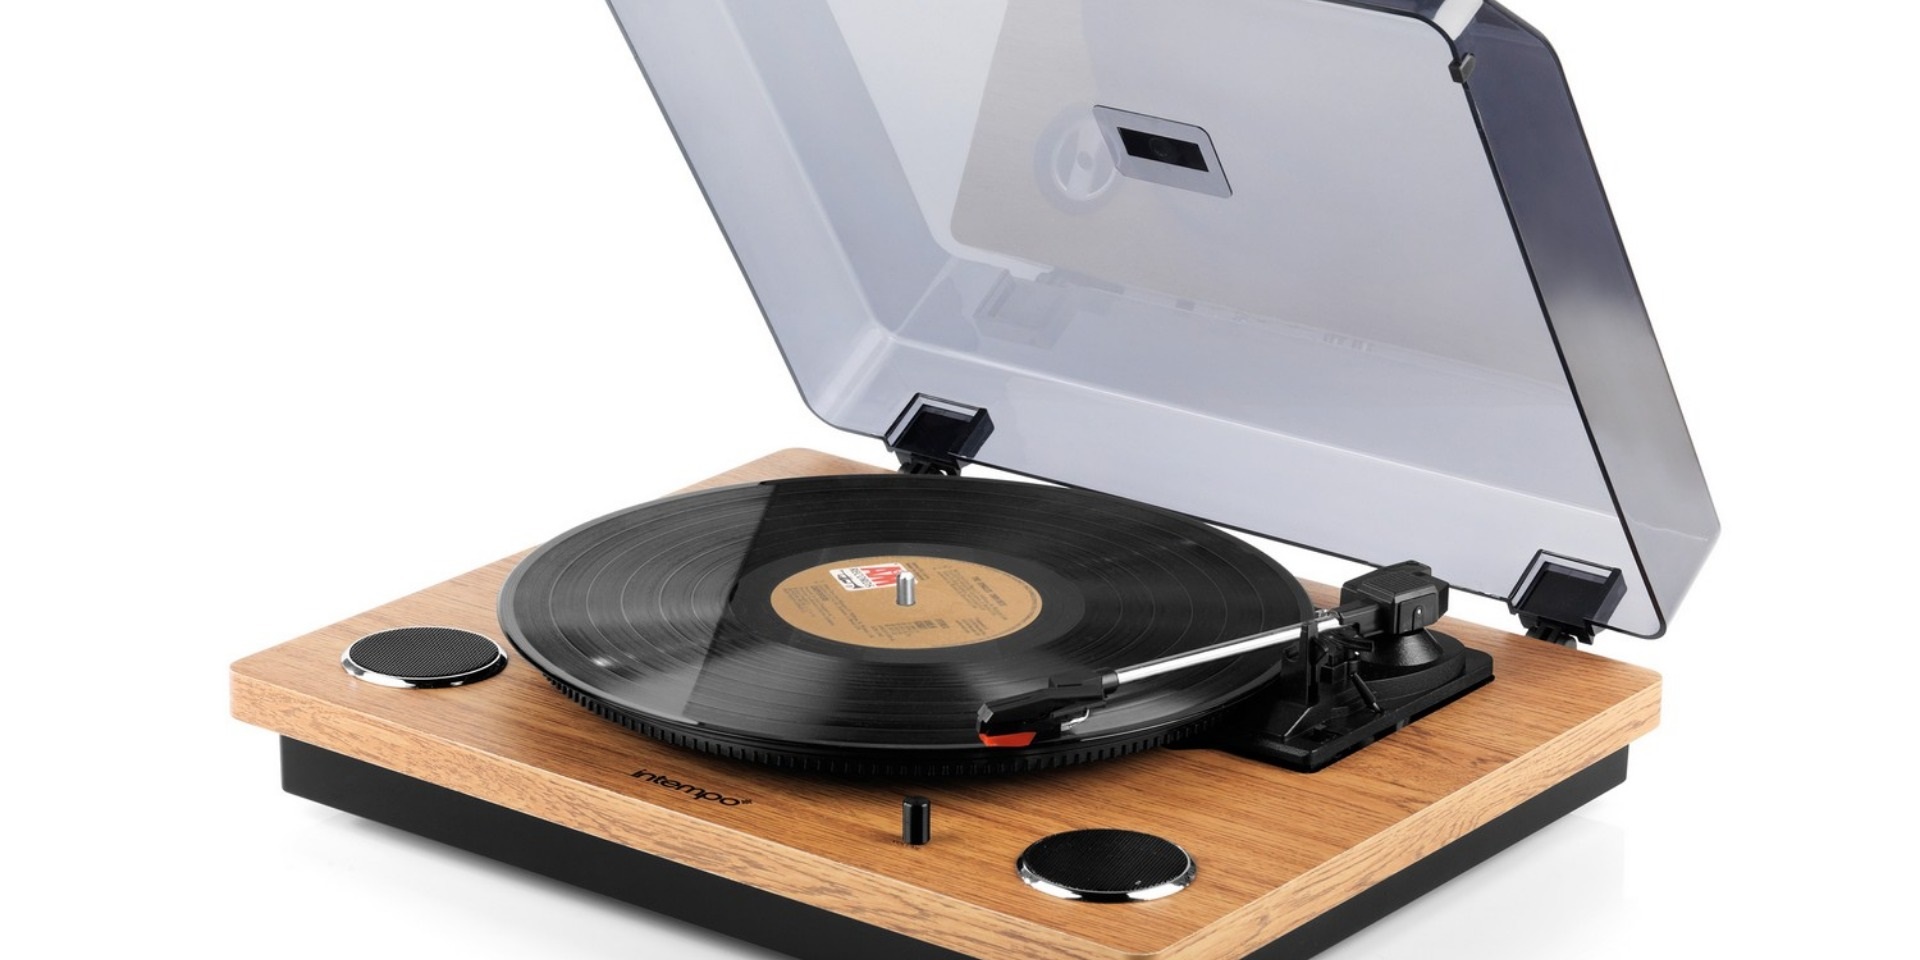 A record player